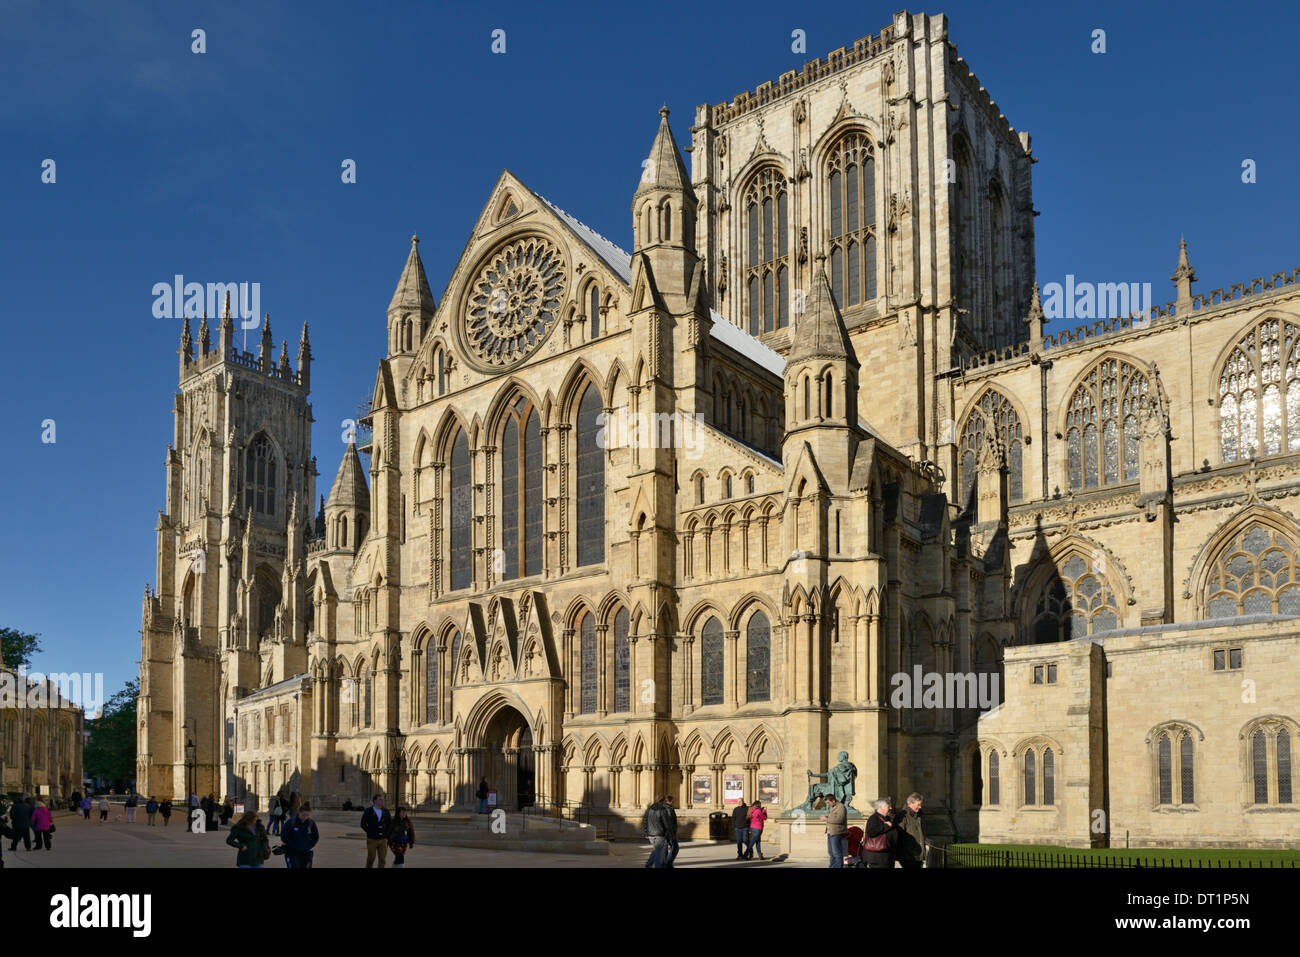 South Piazza, South Transept of York Minster, Gothic Cathedral, York, Yorkshire, England, United Kingdom, Europe Stock Photo